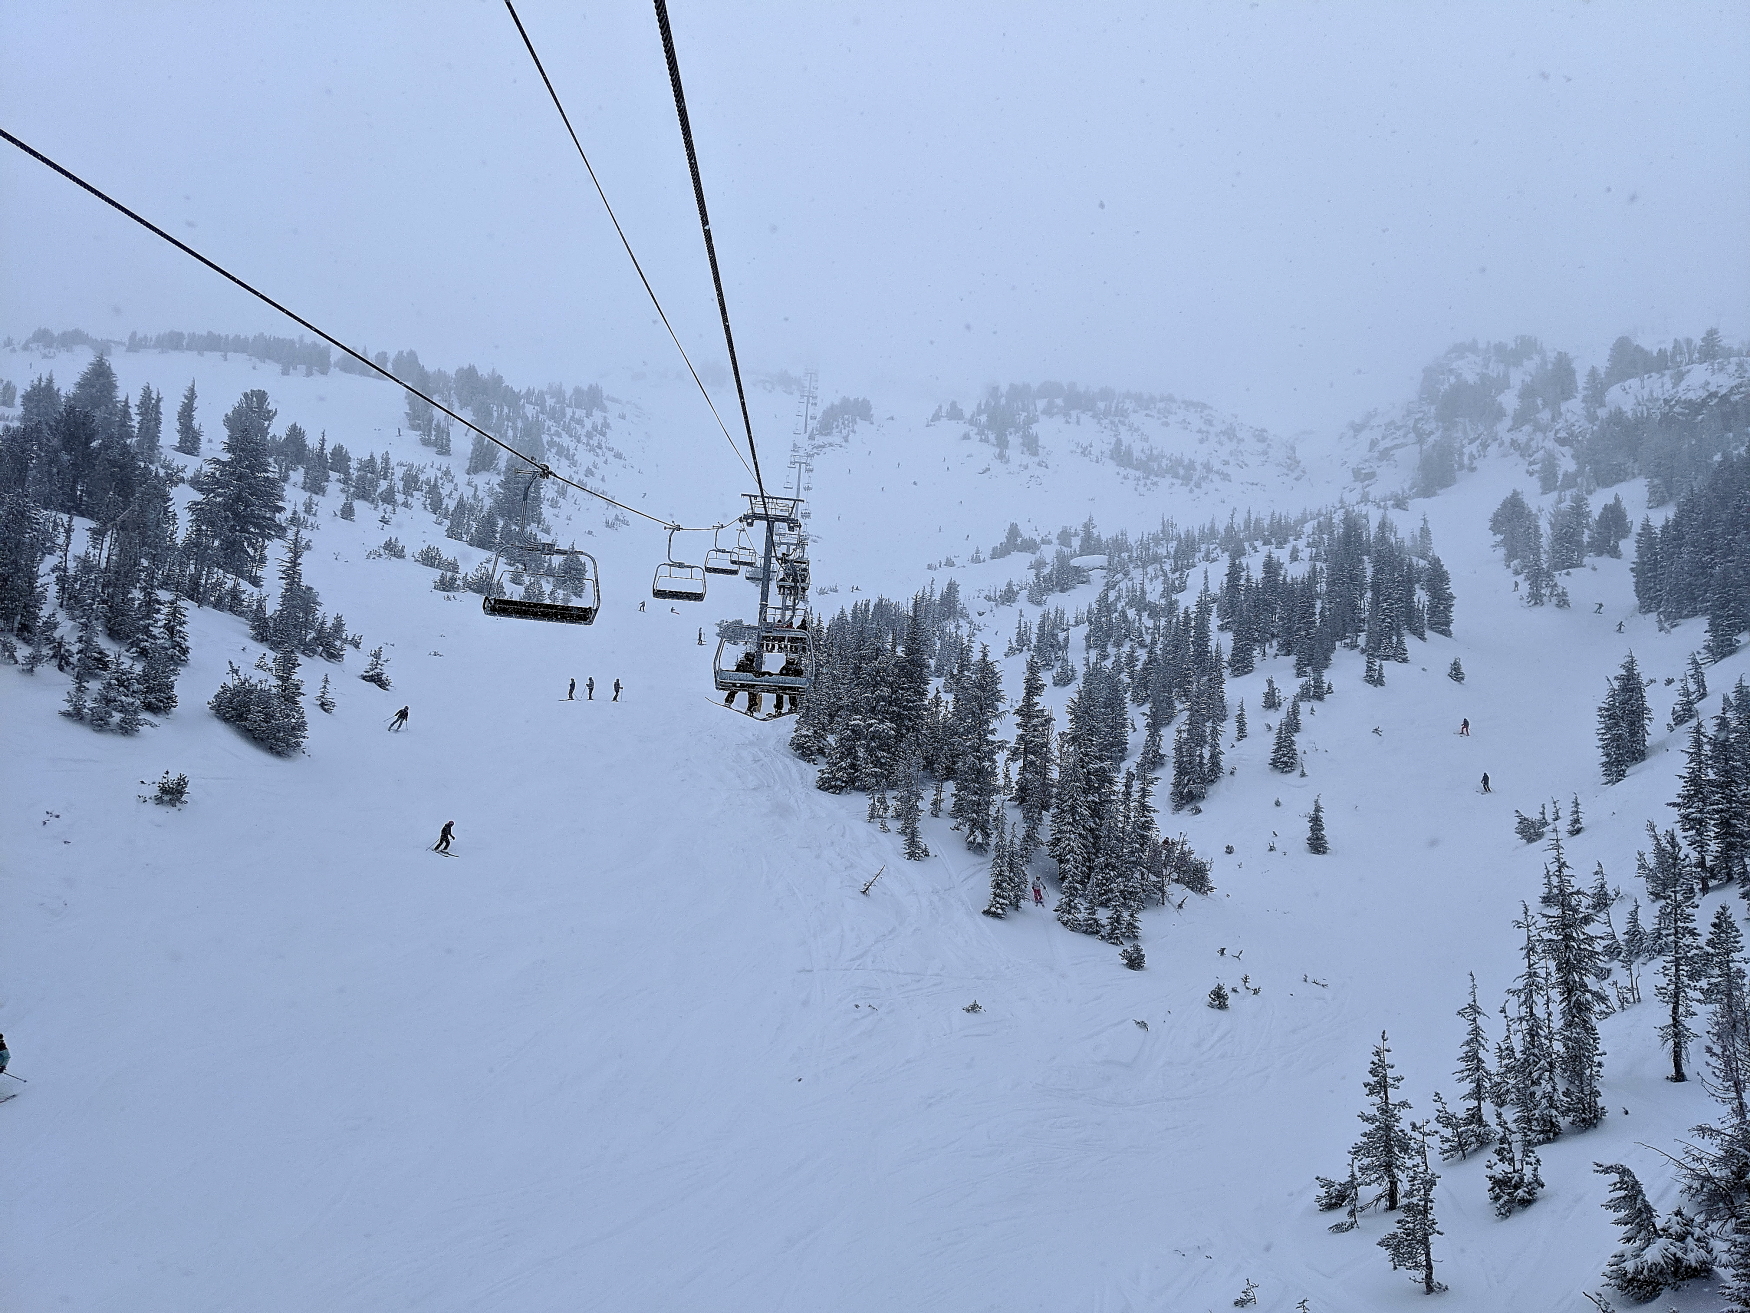 Chair 5 on a Snowy Monday out on Mammoth Mountain.